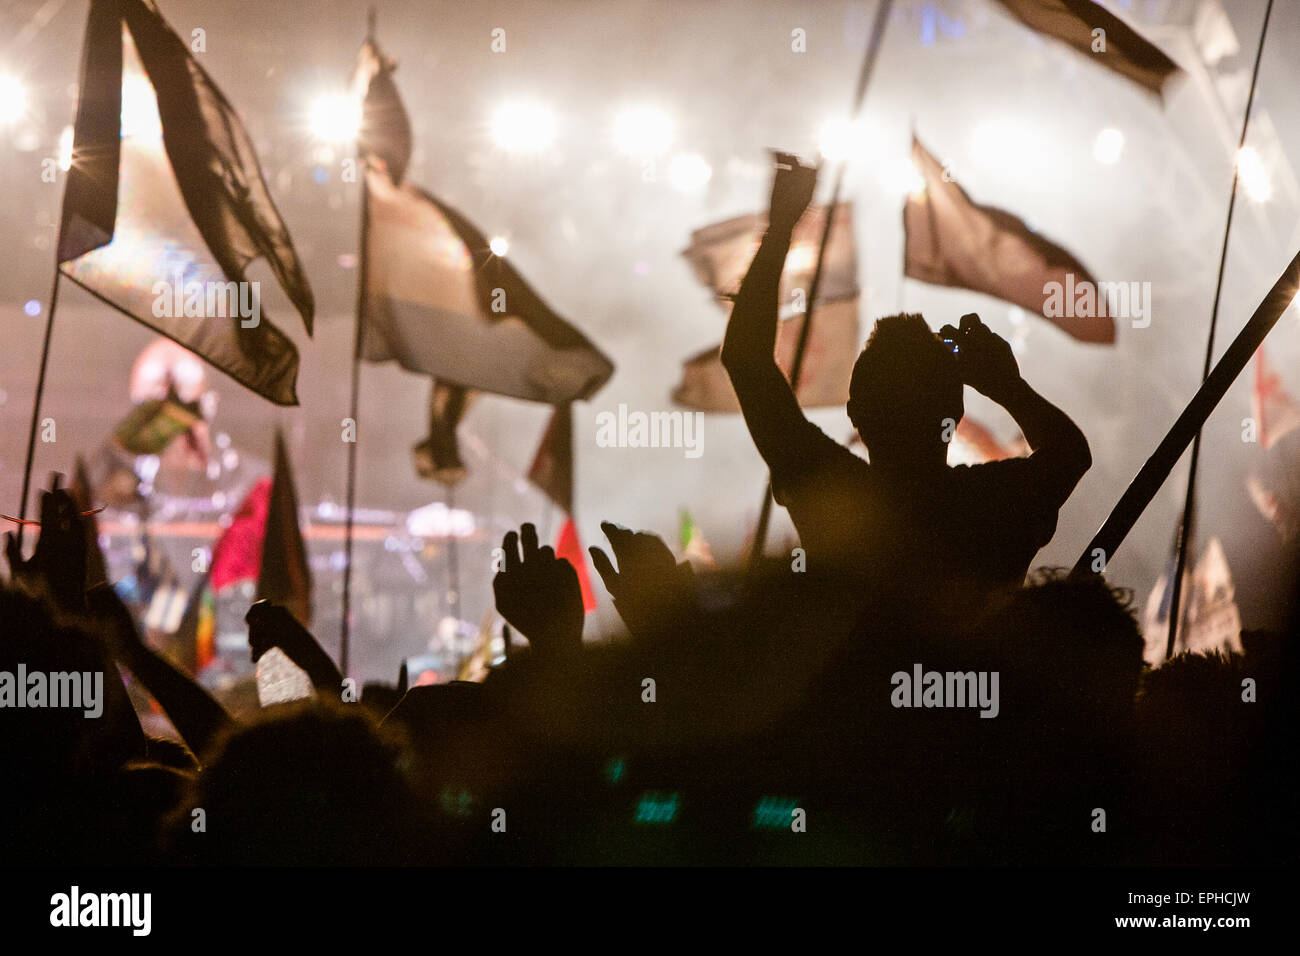 Flags and crowd at Pyramid Stage during headlining performance at Glastonbury Festival/ 'Glasto' held on working farm, Worthy Fa Stock Photo